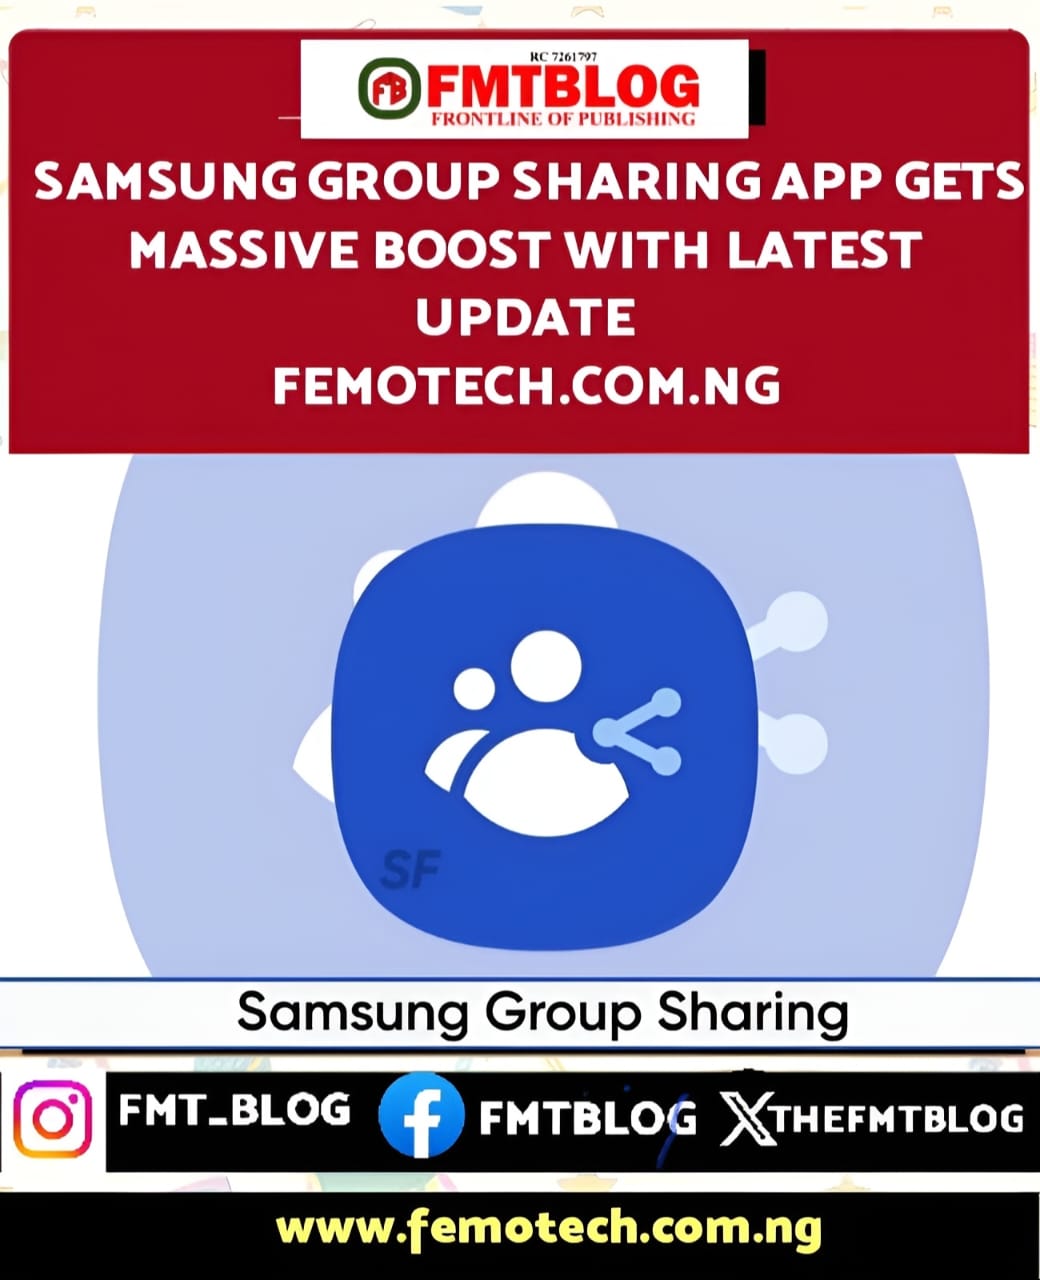 Samsung Group Sharing App Gets Massive Boost With Latest Update